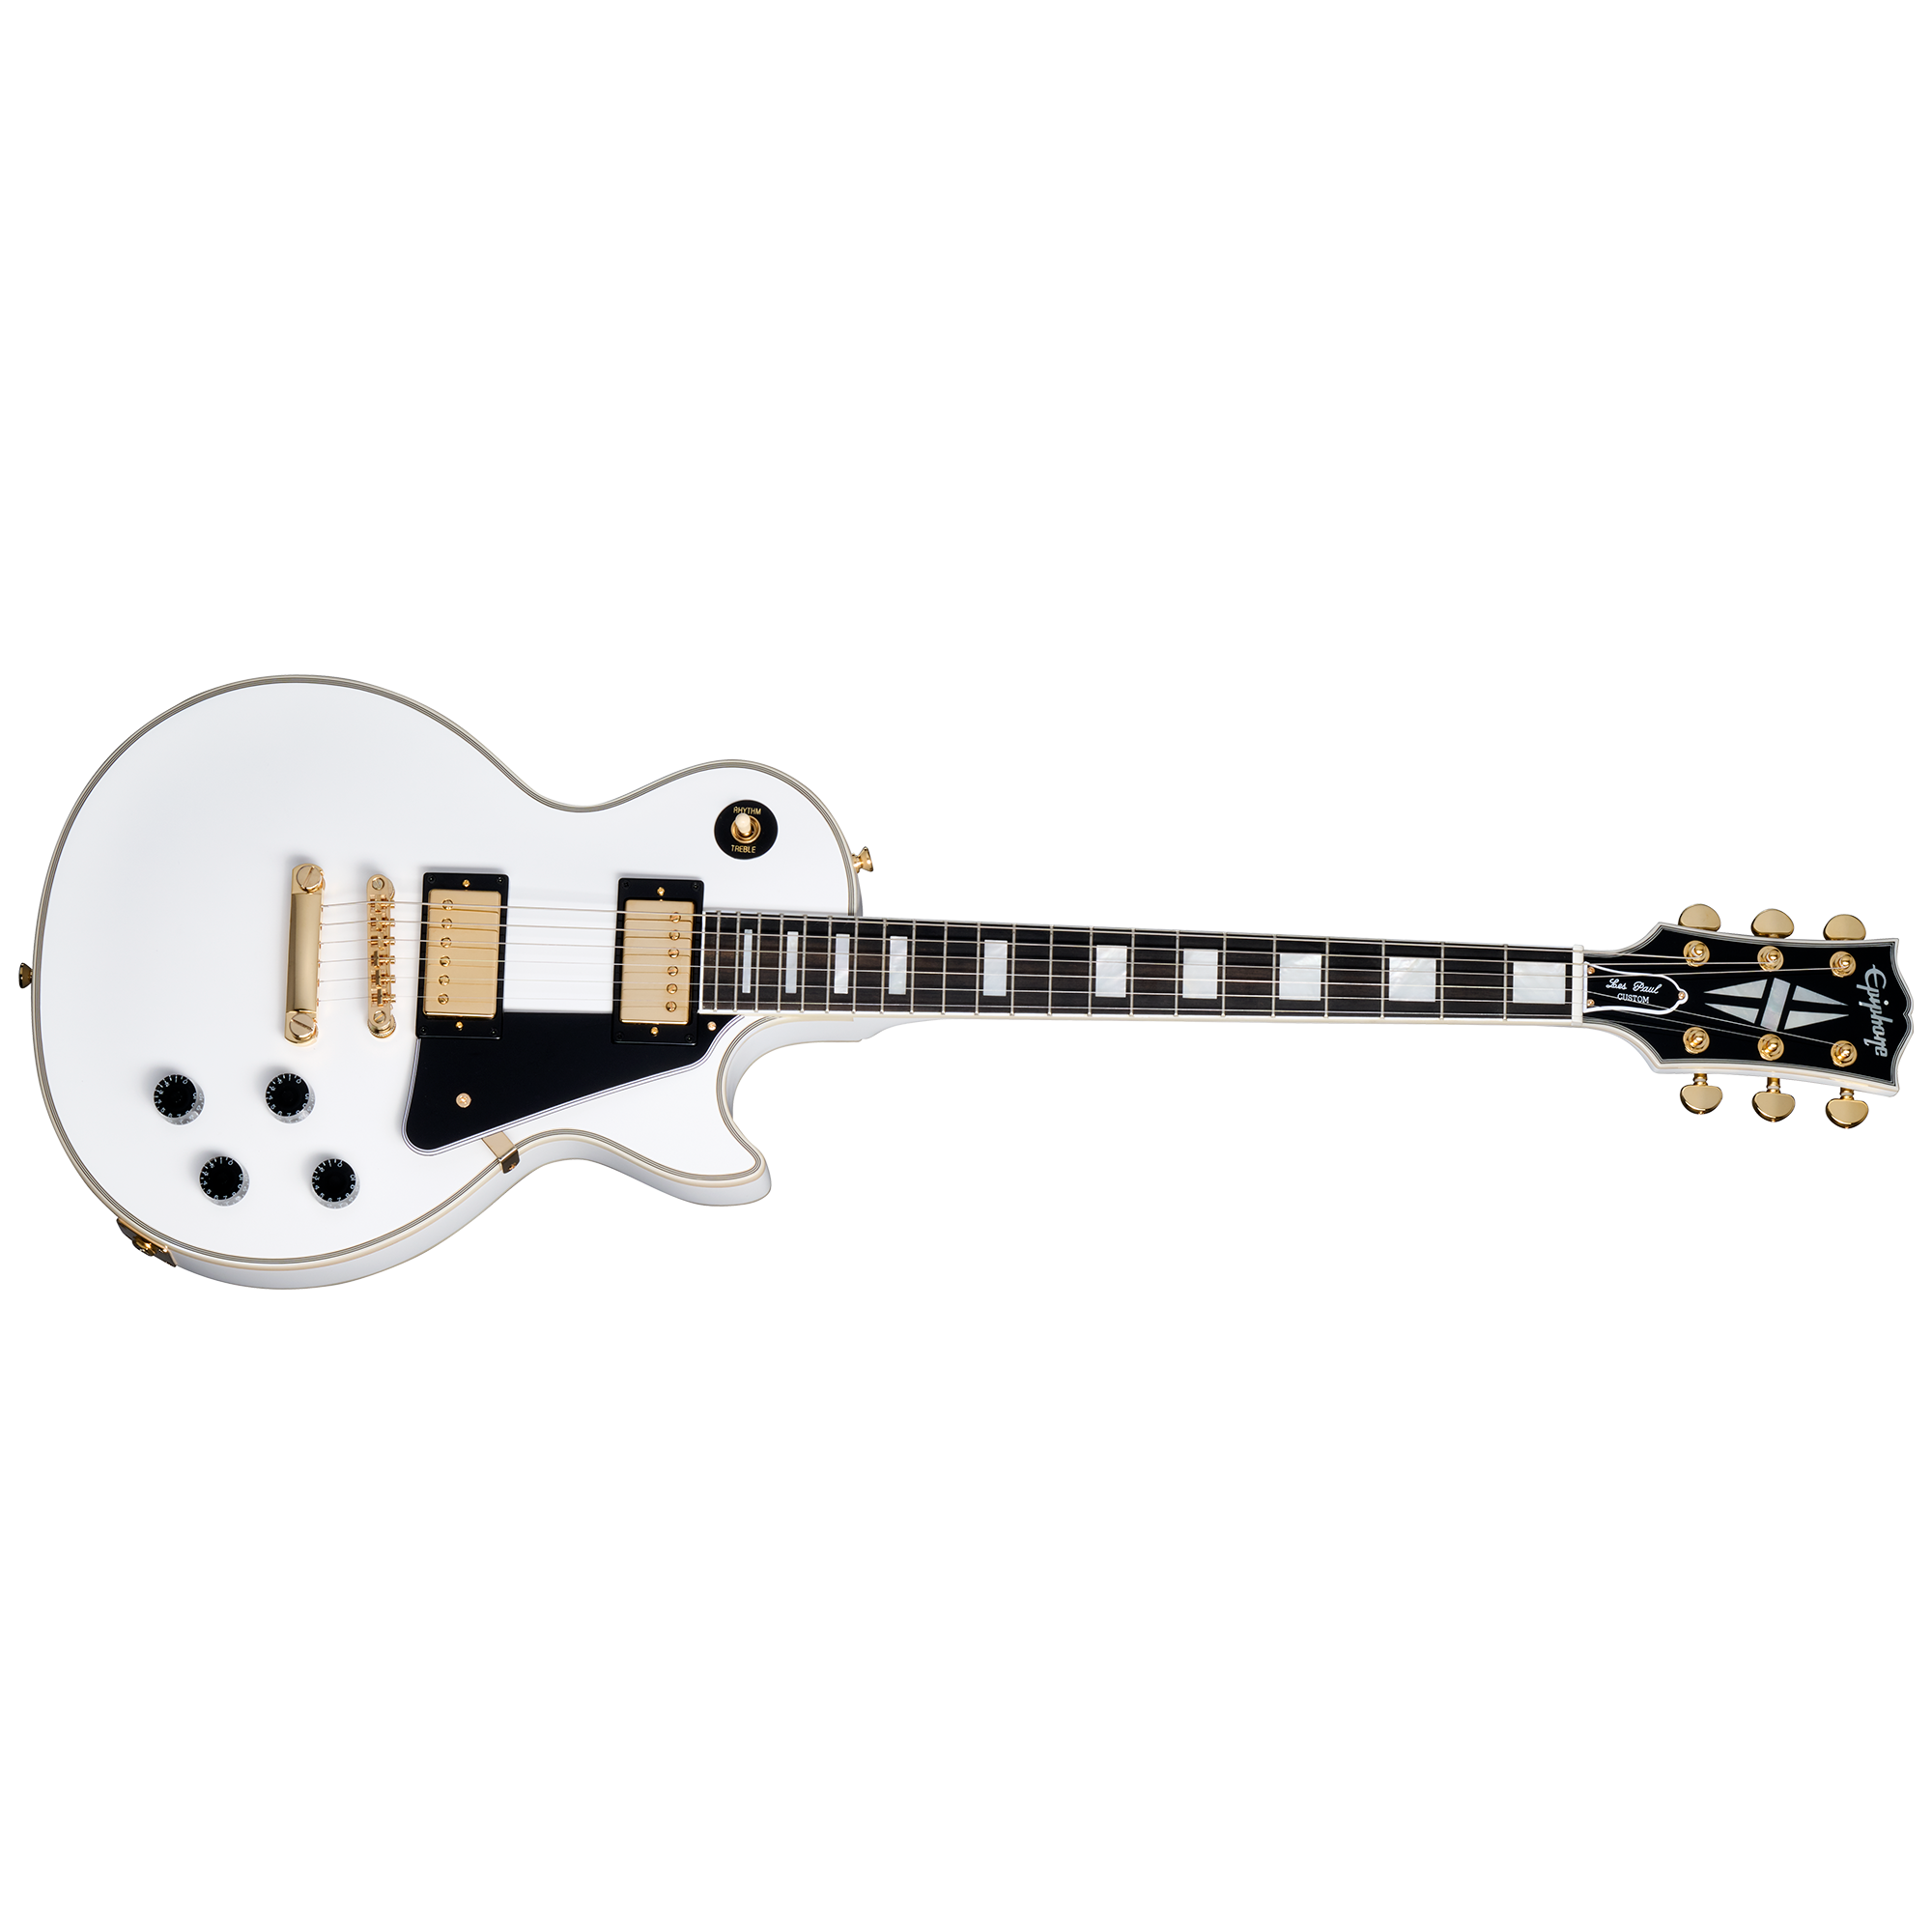 Epiphone ( GIBSON HEADSTOCK ) Les Paul Custom Electric Guitar with Case - White ECLPCAWGH